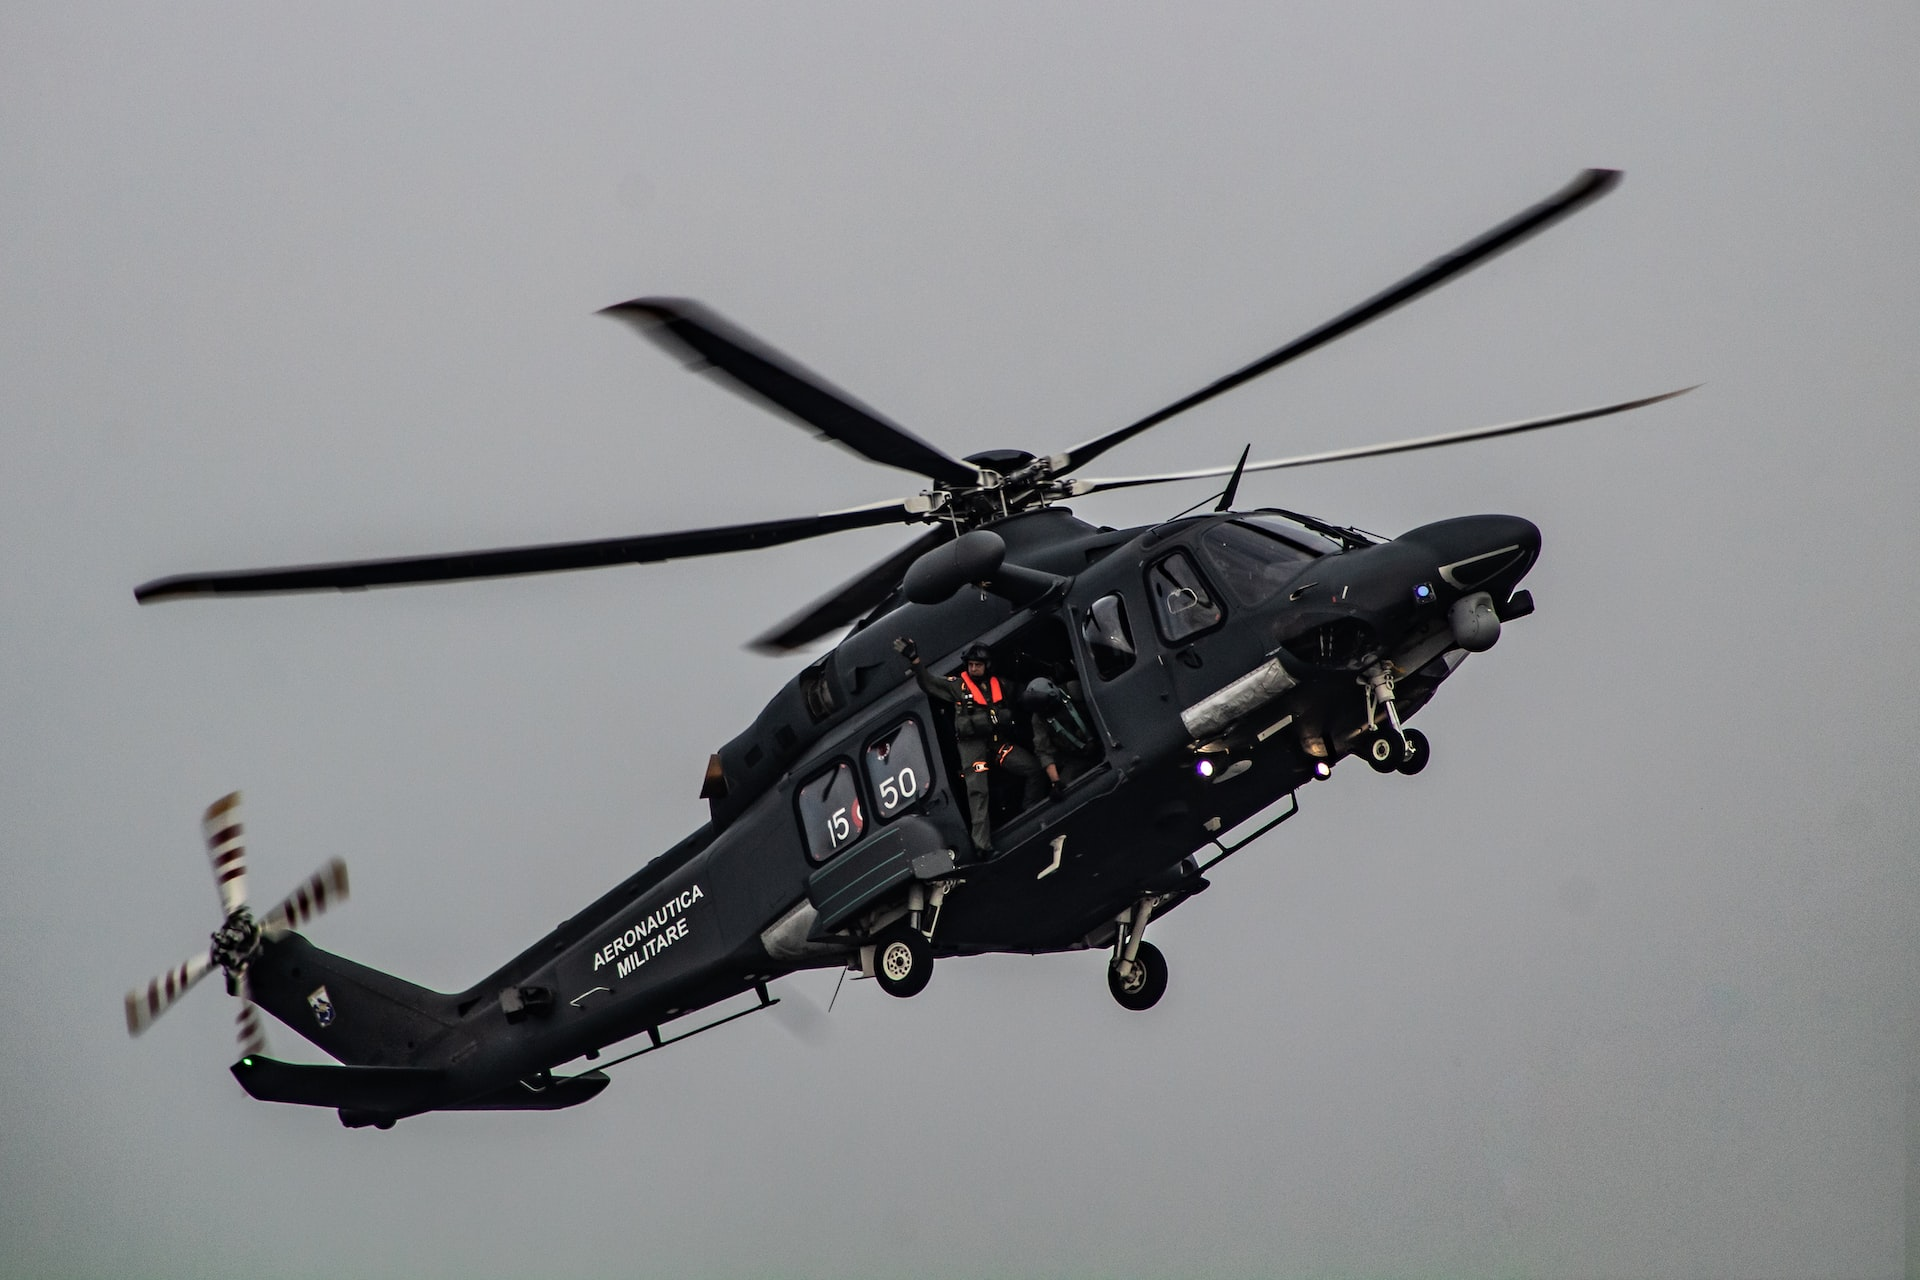 A black military helicopter with crew in flight.